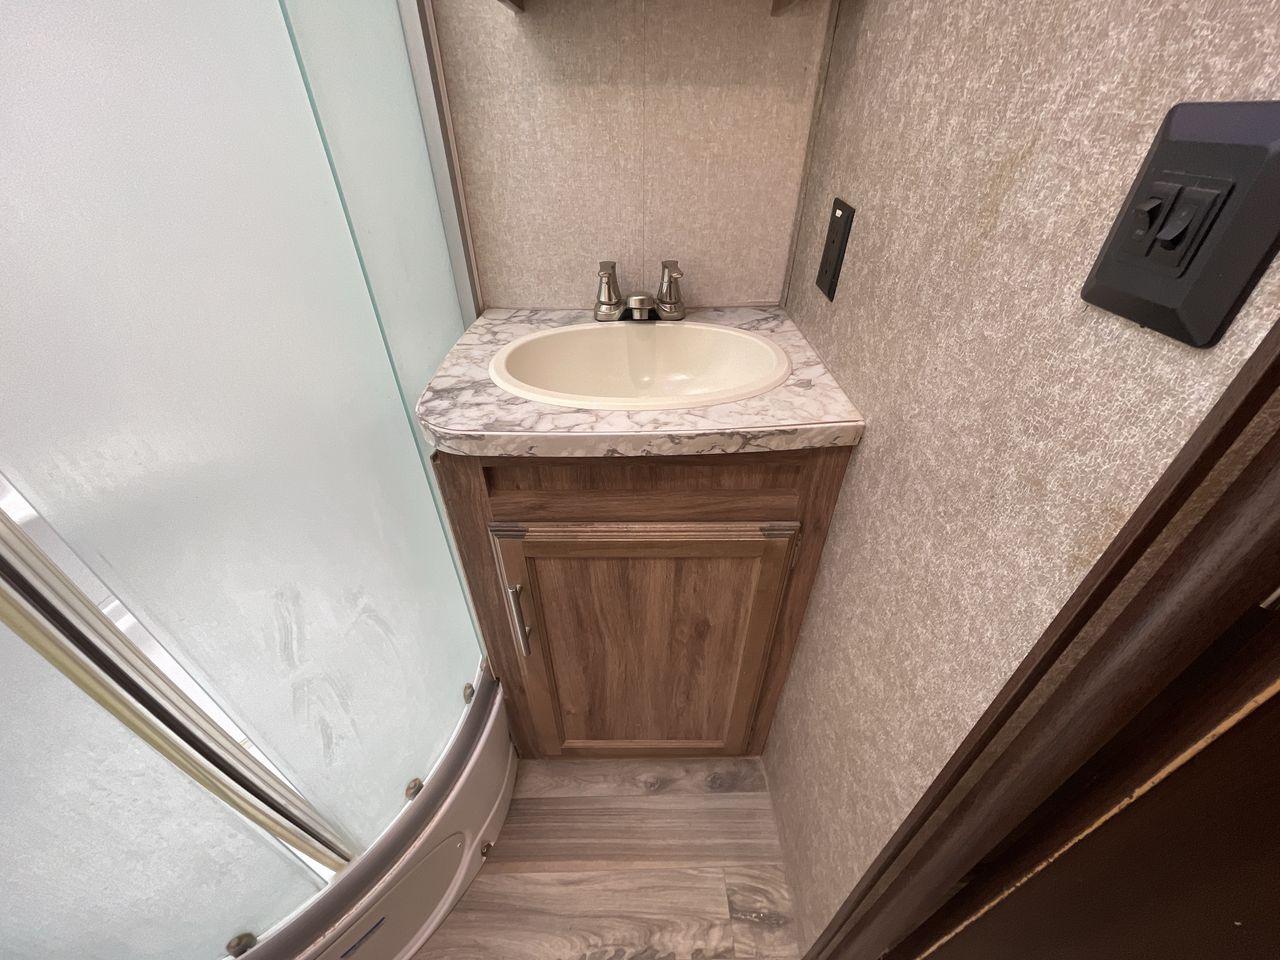 2018 WHITE JAYCO JAY FLIGHT 23MRB (1UJBJ0BN5J1) , Length: 28.17 ft | Dry Weight: 5,560 lbs. | Gross Weight: 7,250 lbs. | Slides: 1 transmission, located at 4319 N Main Street, Cleburne, TX, 76033, (817) 221-0660, 32.435829, -97.384178 - The 2018 Jayco Jay Flight 23MRB is a travel trailer that encapsulates both compactness and luxury for unparalleled camping experiences. Spanning 28 feet in length, this model boasts a thoughtfully arranged interior featuring a single slide-out, seamlessly amplifying the living space. The Jay Flight - Photo #16